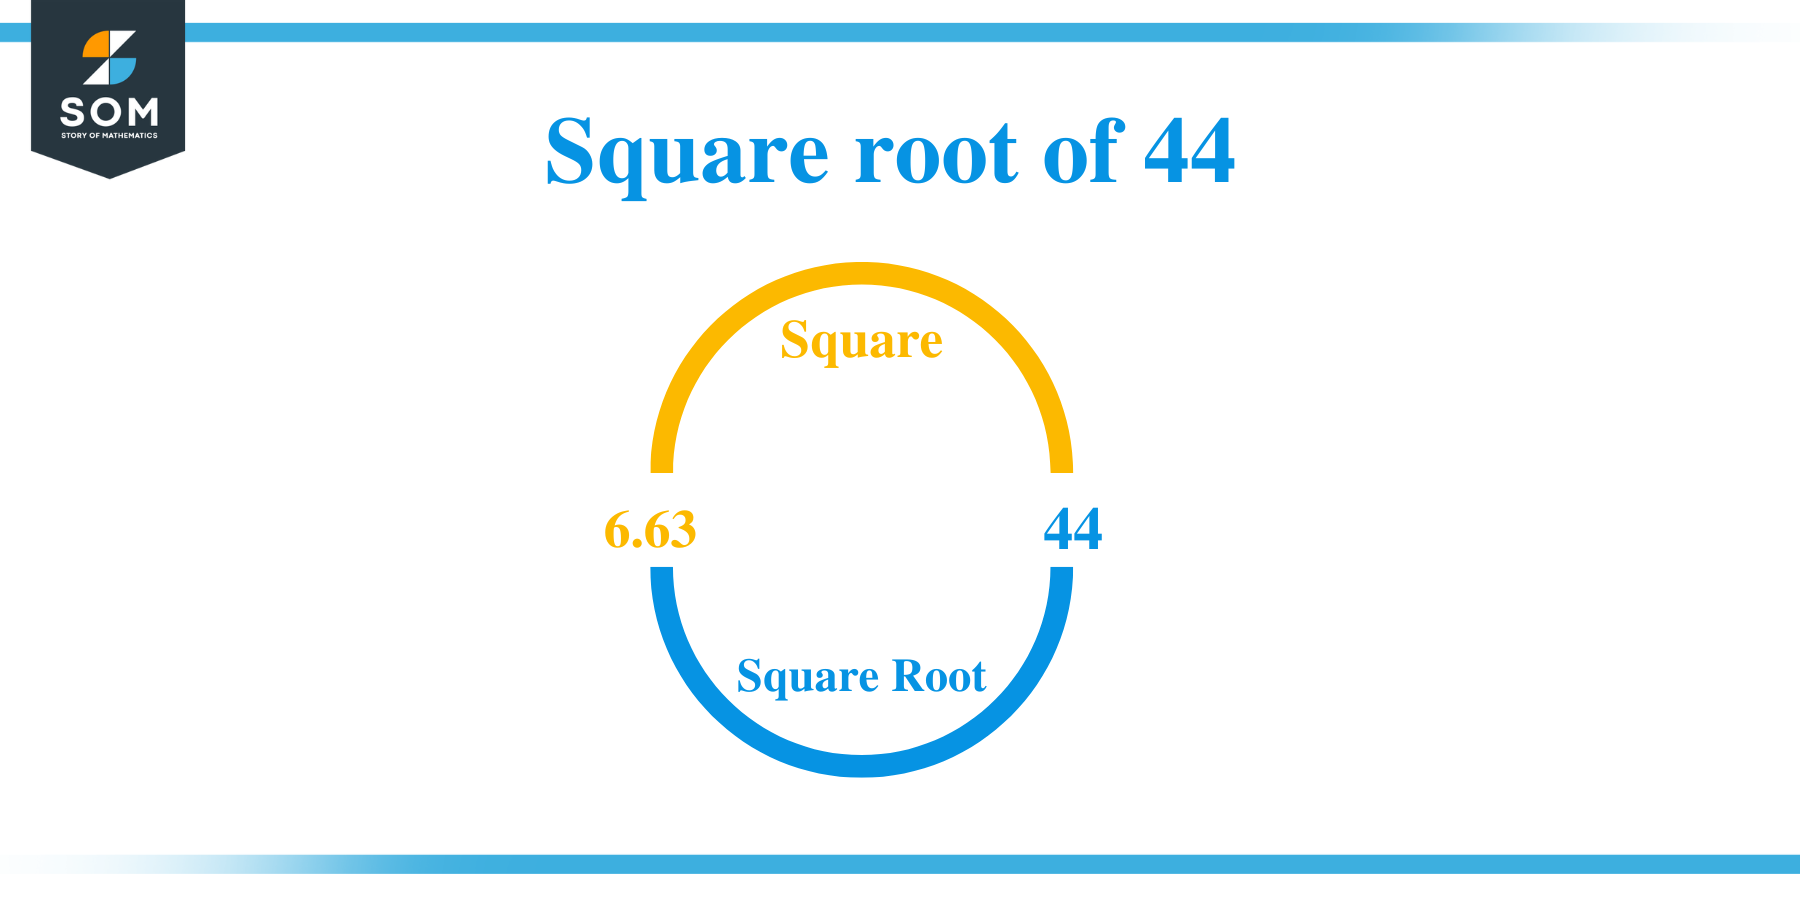 Square root of 44